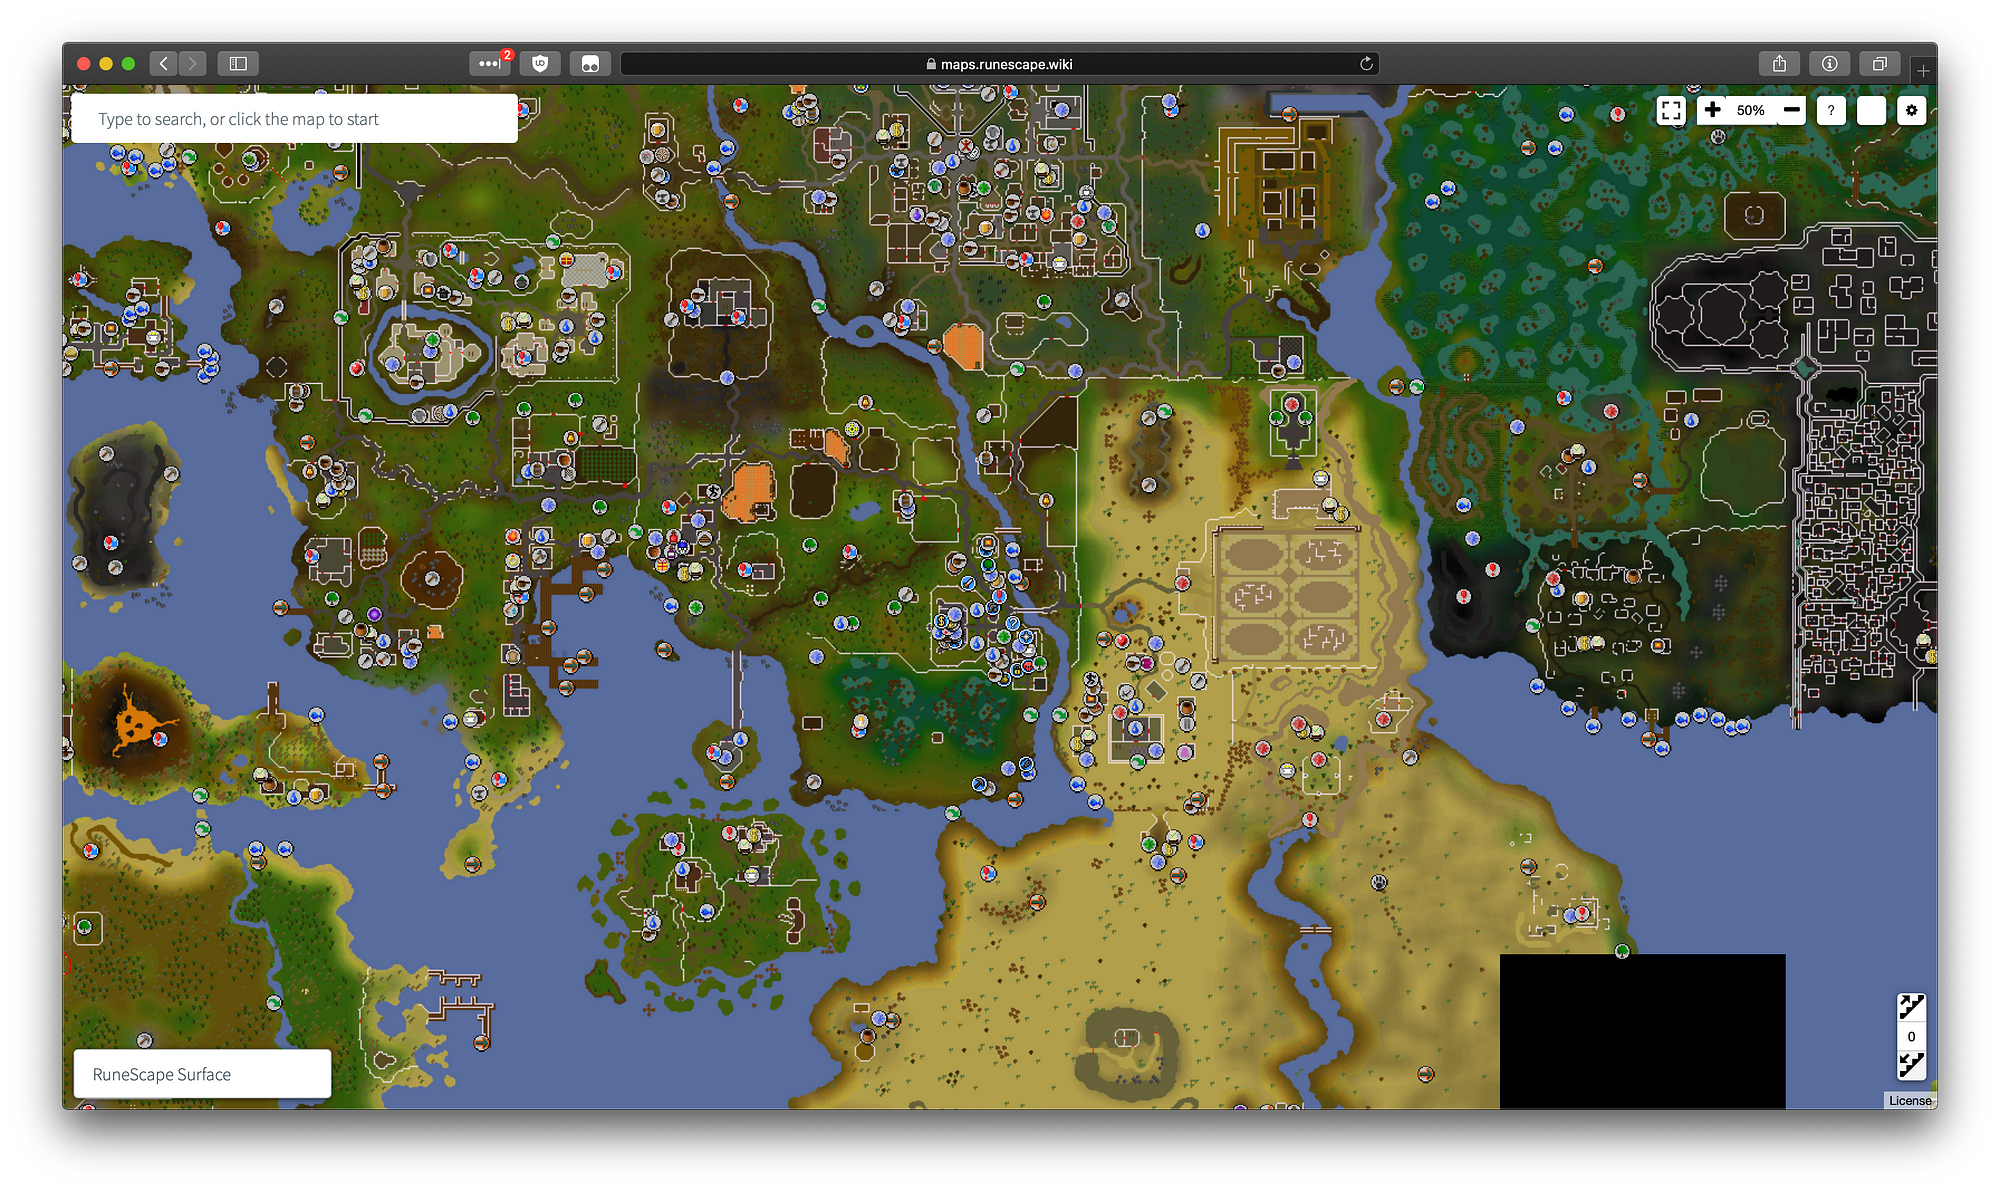 Putting together the RuneScape Wiki, by Jayden